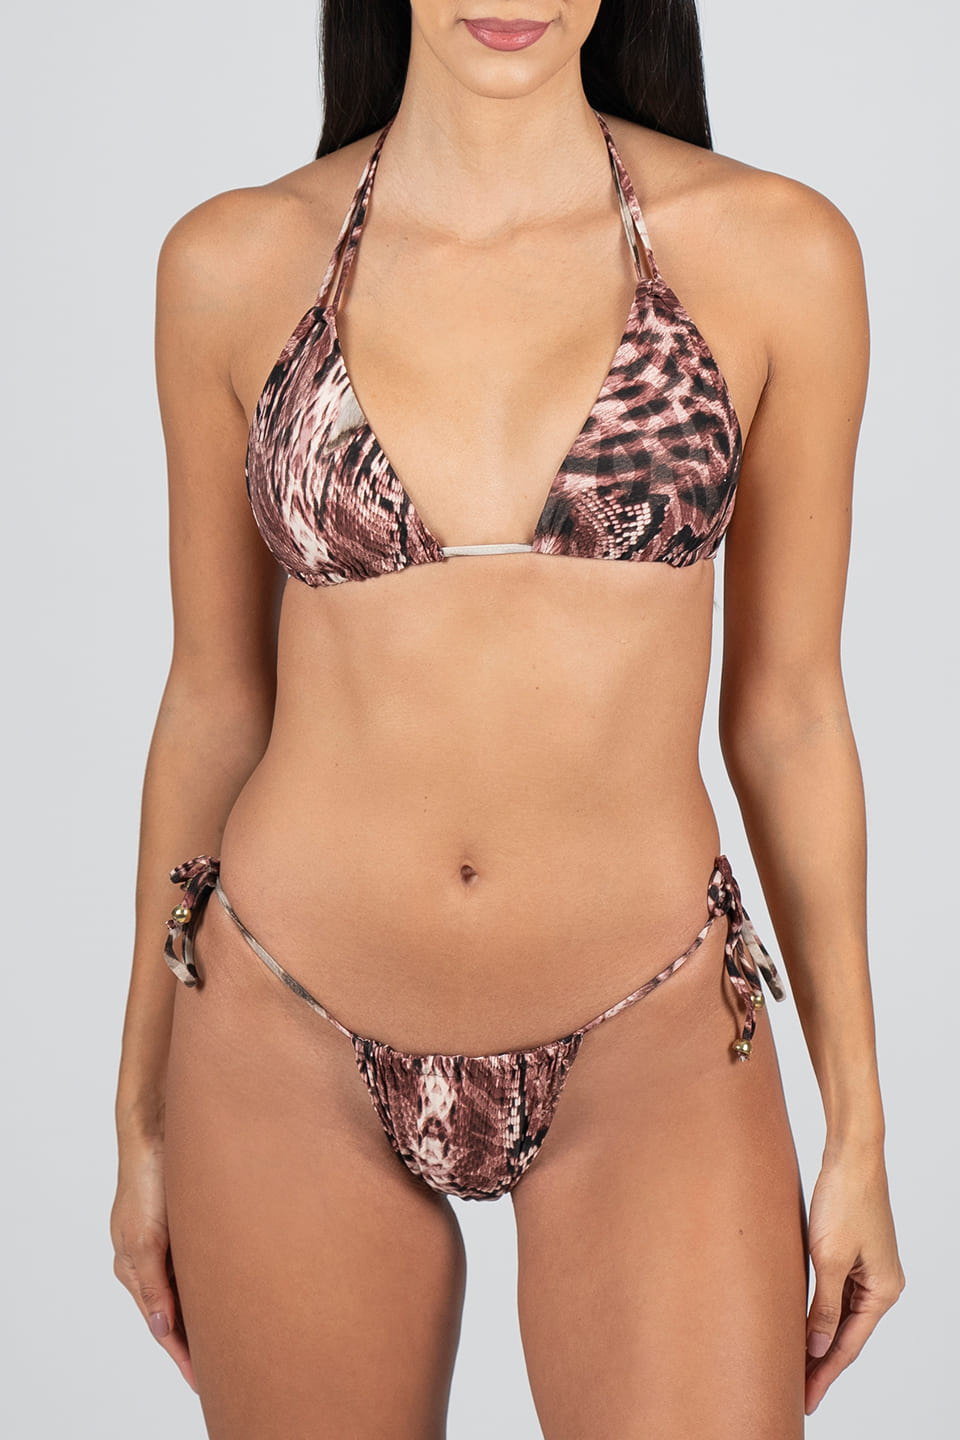 Shop online trendy Multicolor Bikinis from Lavishly Appointed Fashion designer. Product gallery 1